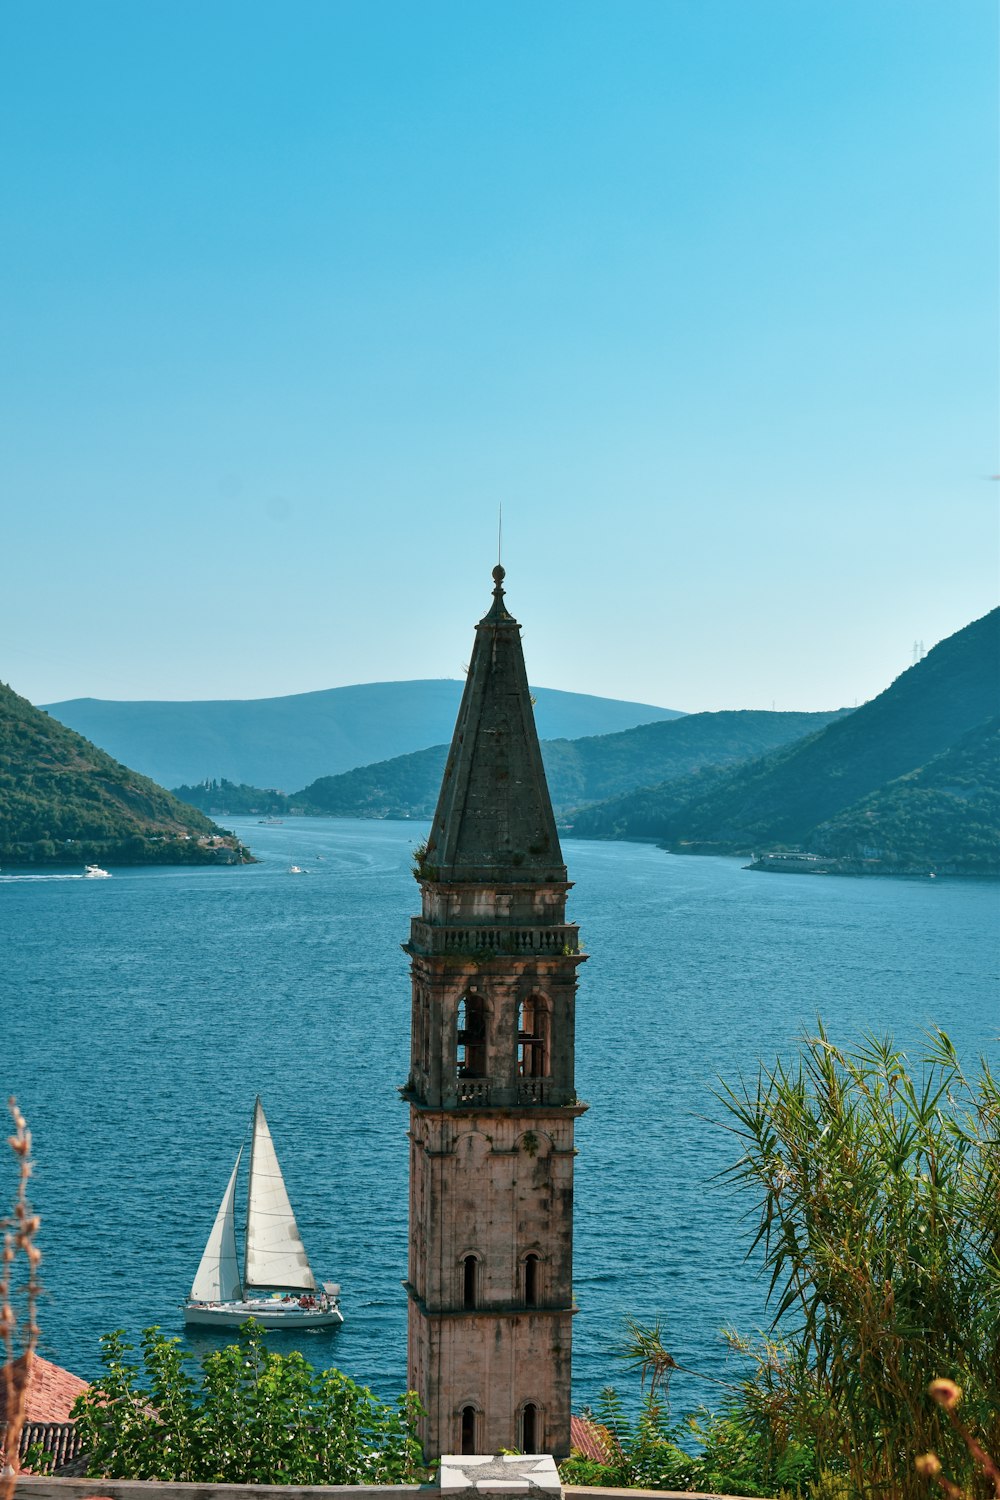 a tower with a steeple by a body of water